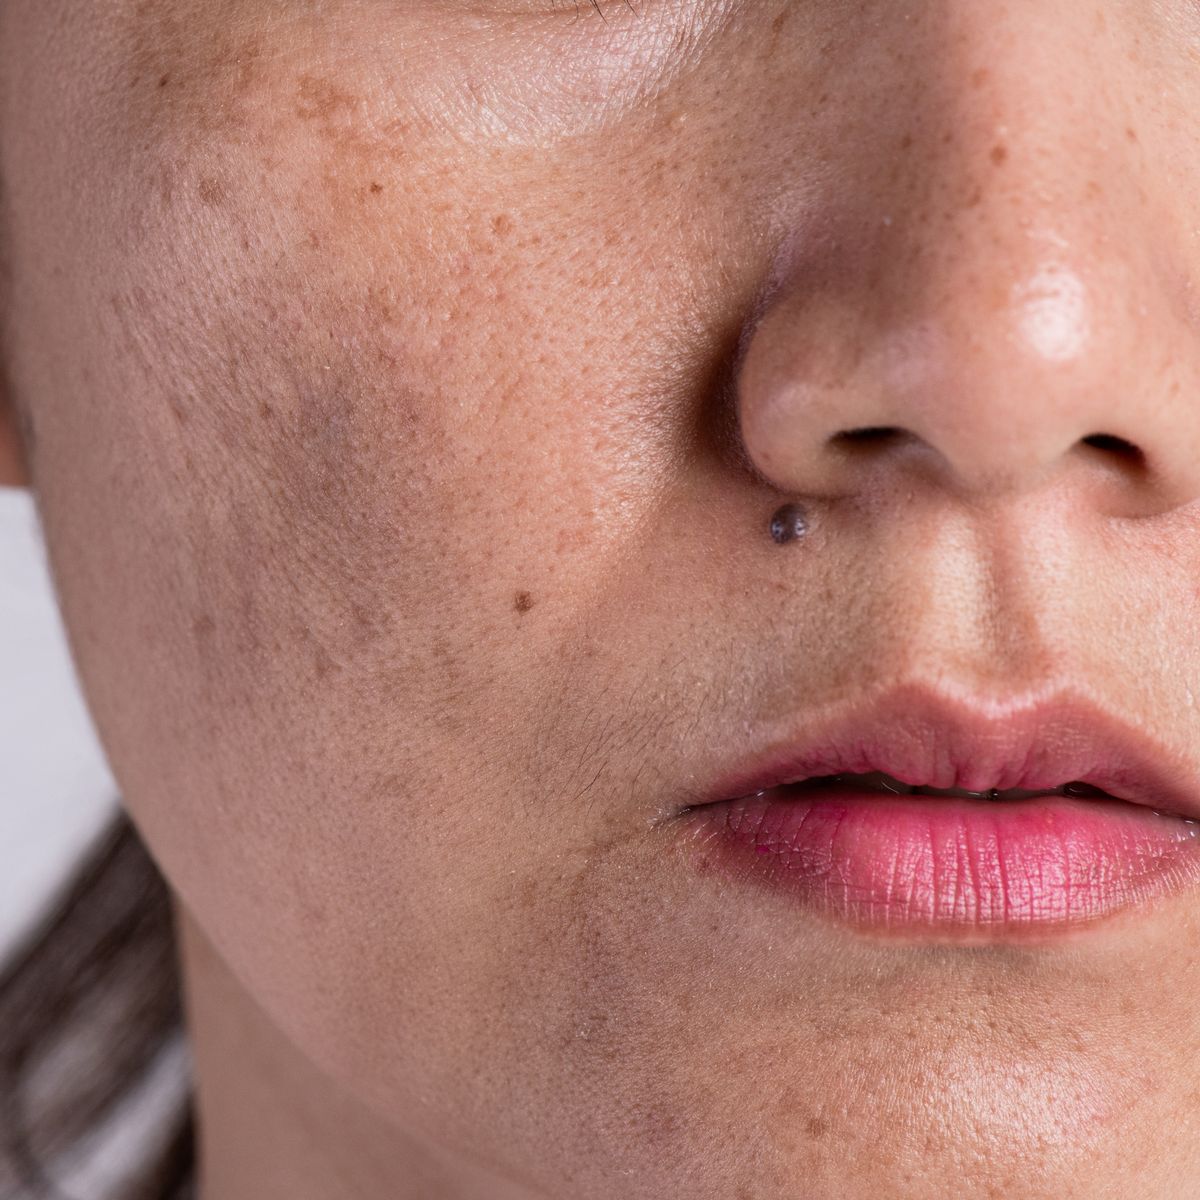 How I recue blemishes, spots and pigmentation form my face